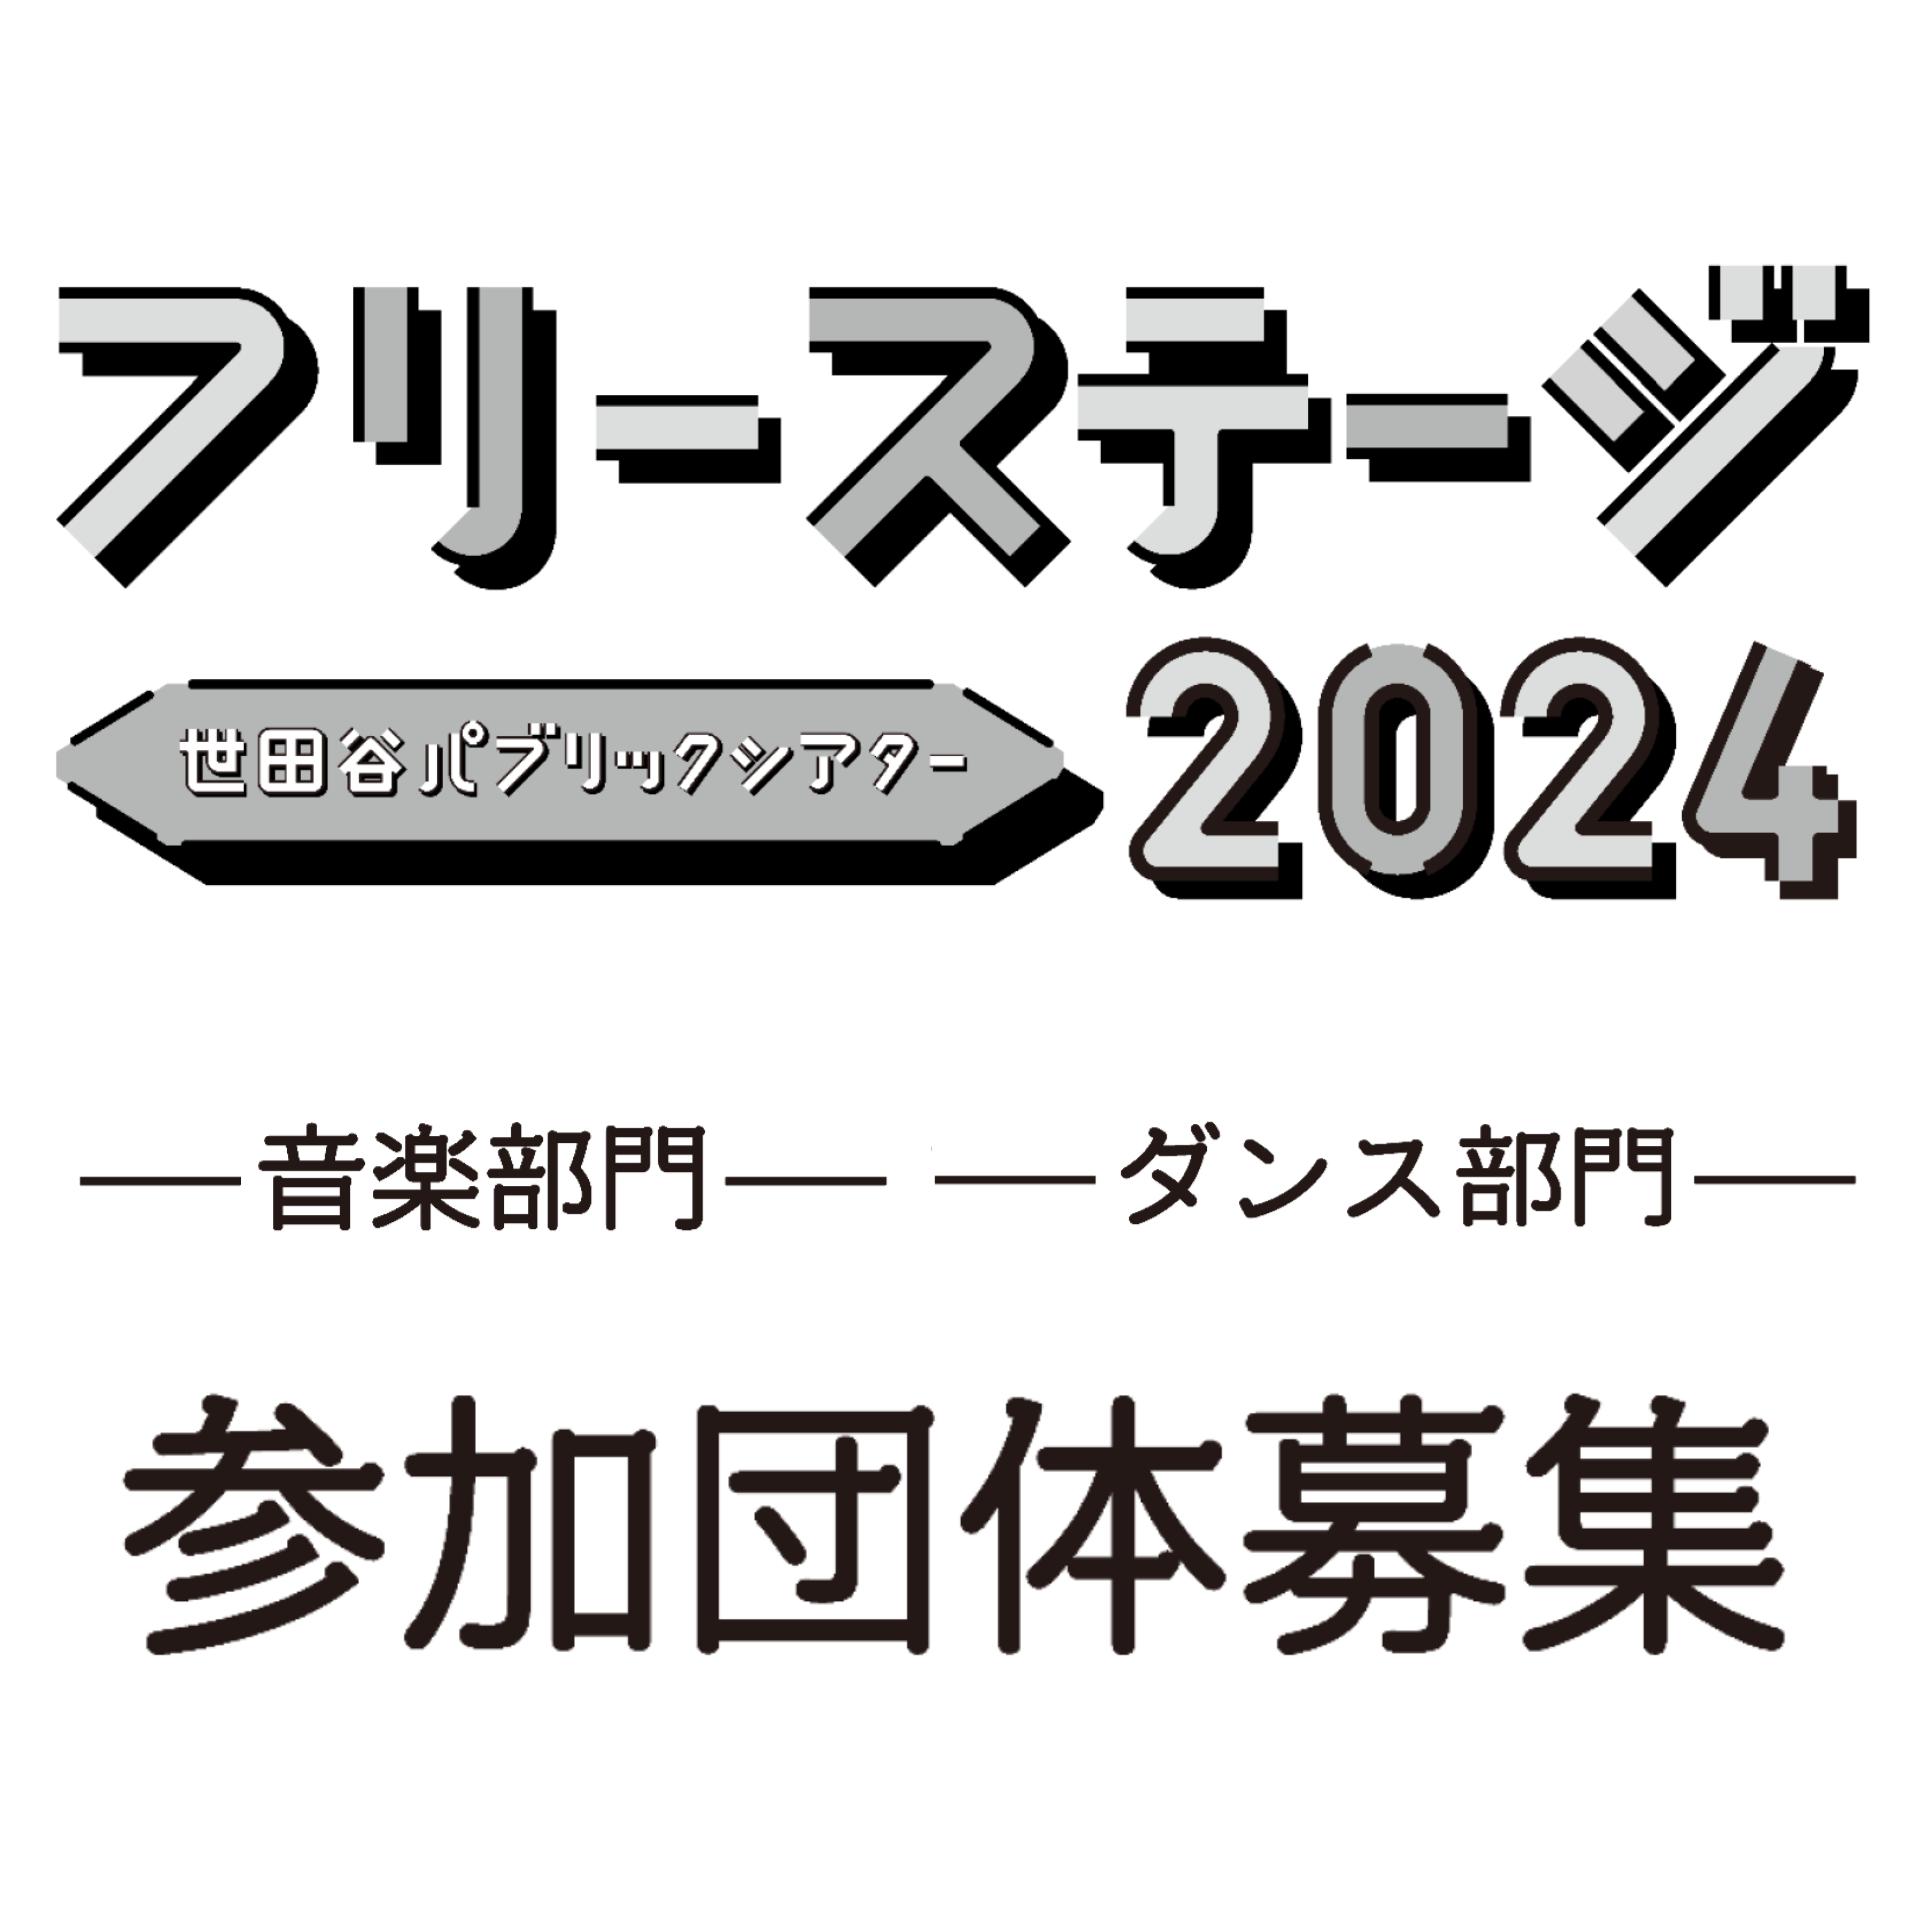 Recruitment of participating groups for “Free Stage 2024”